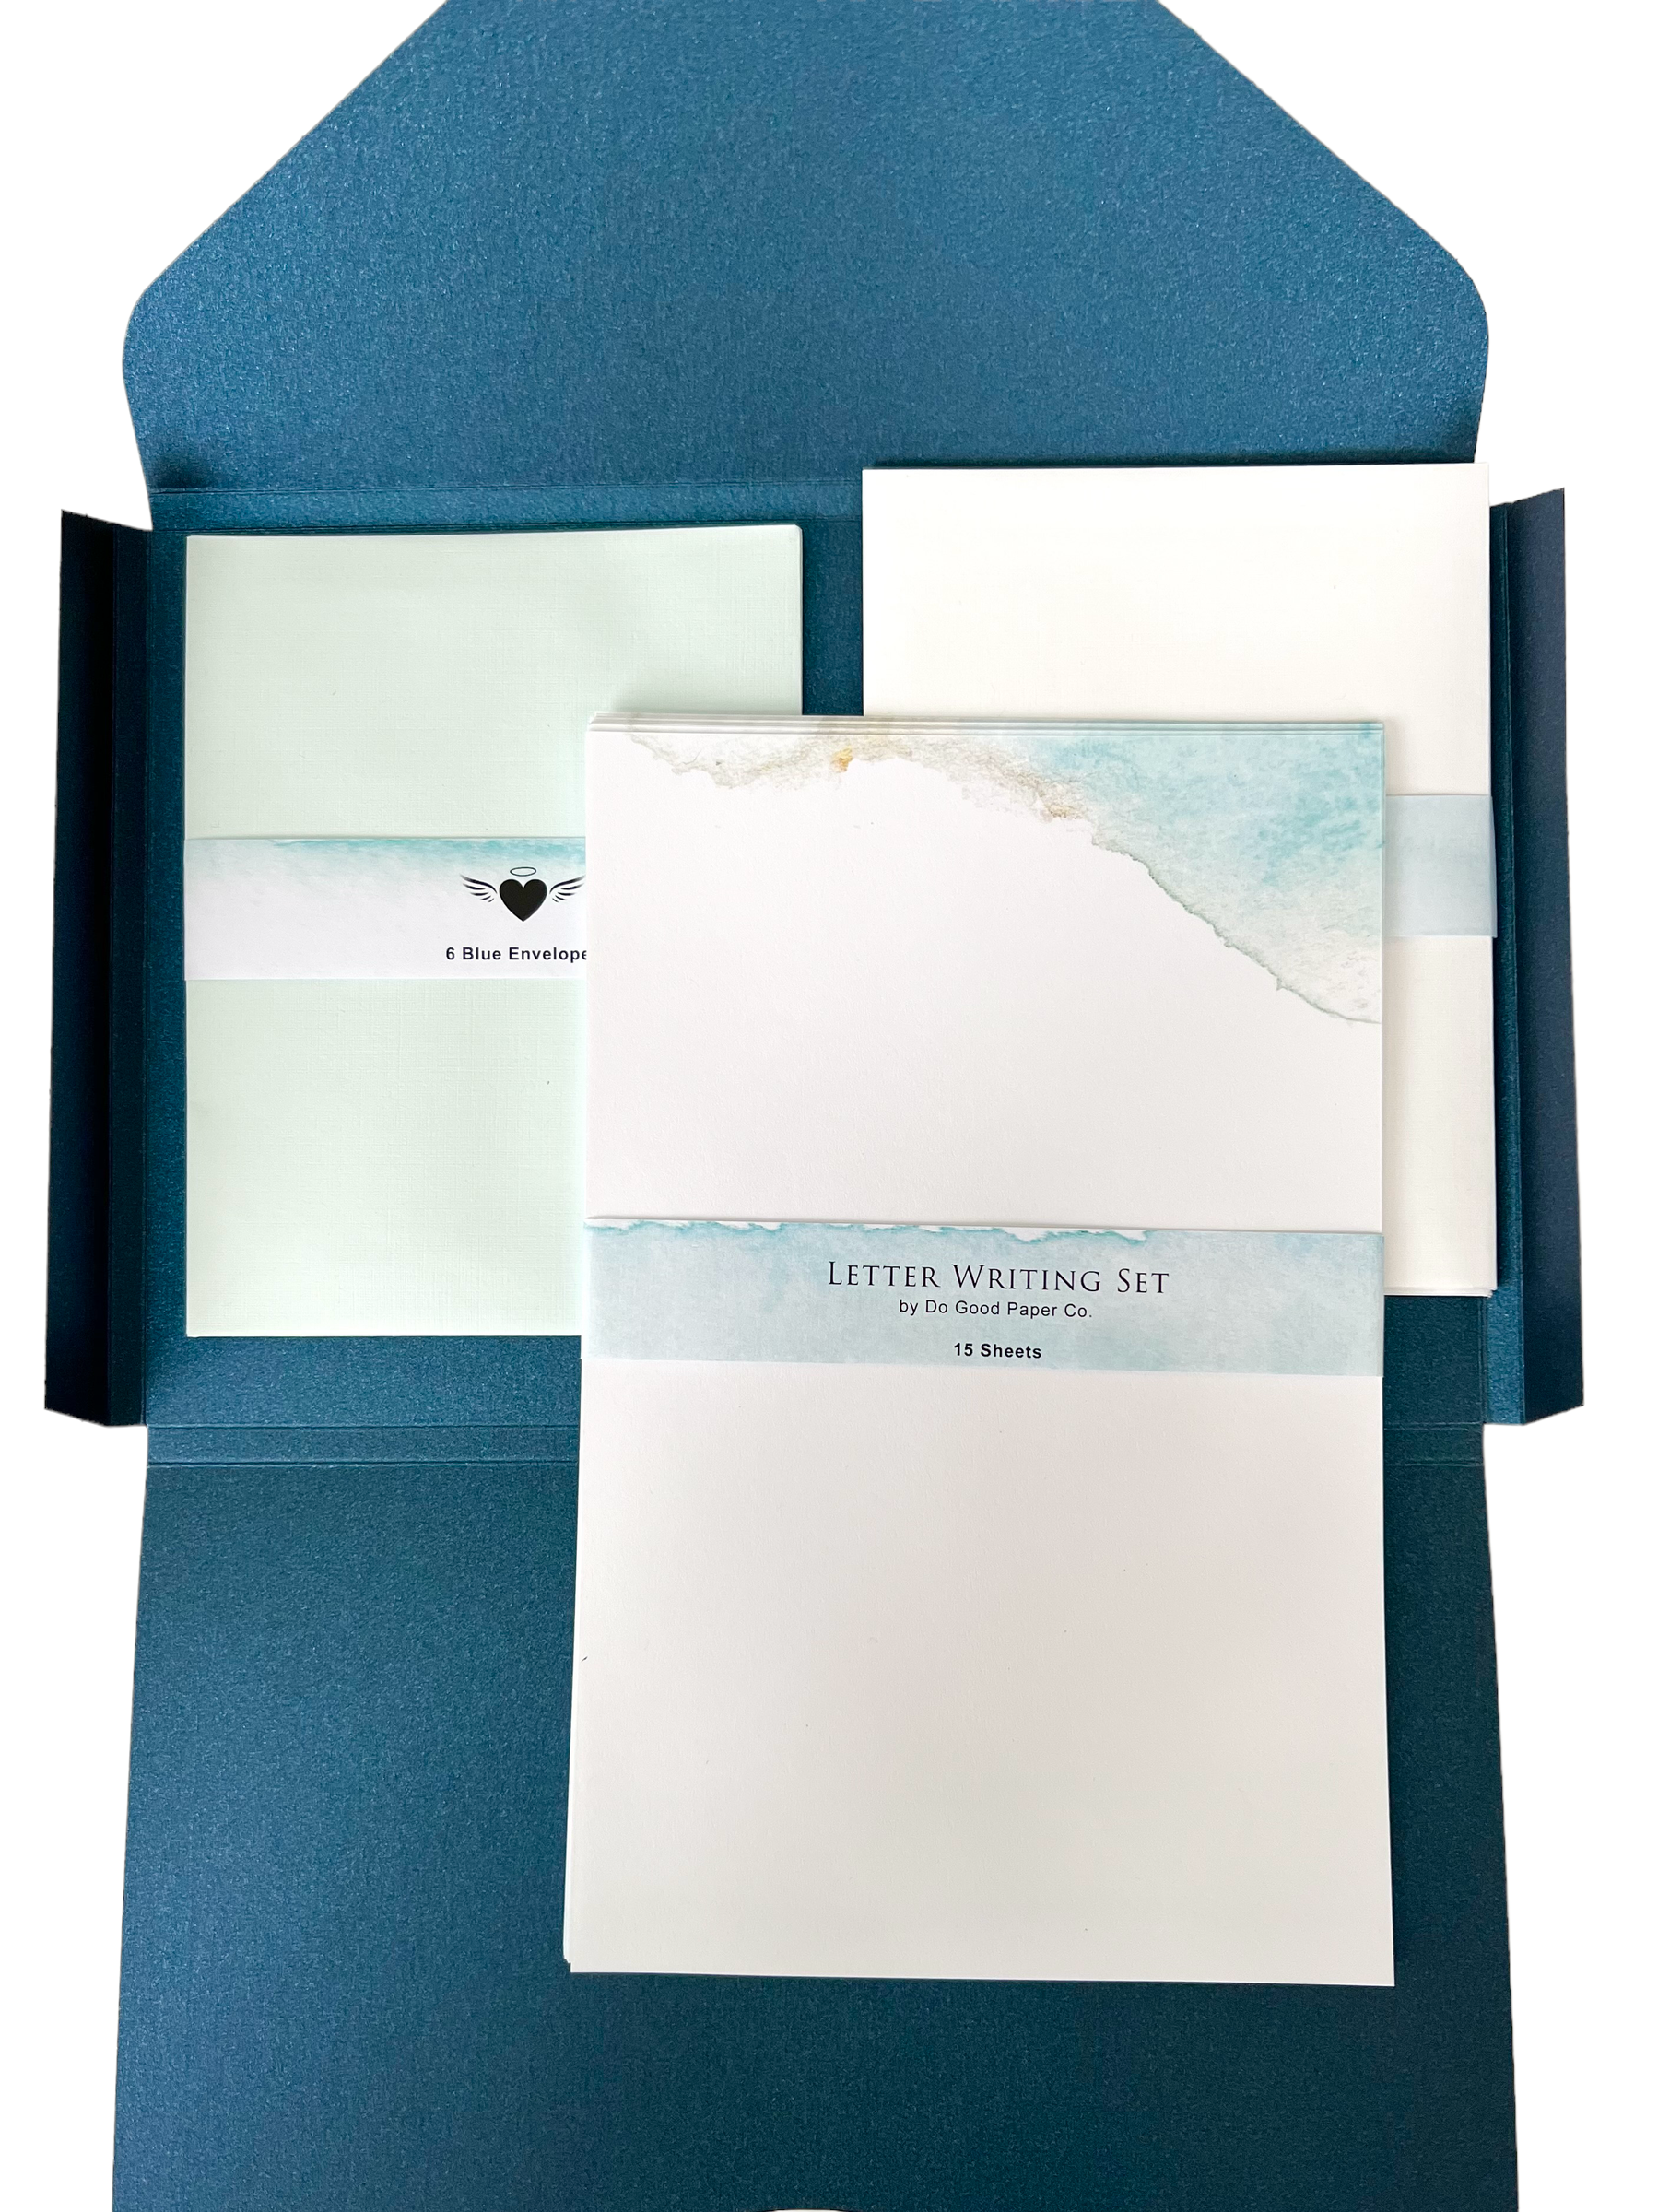 Letter writing sheets on top of 6 blue envelopes and 6 white envelopes